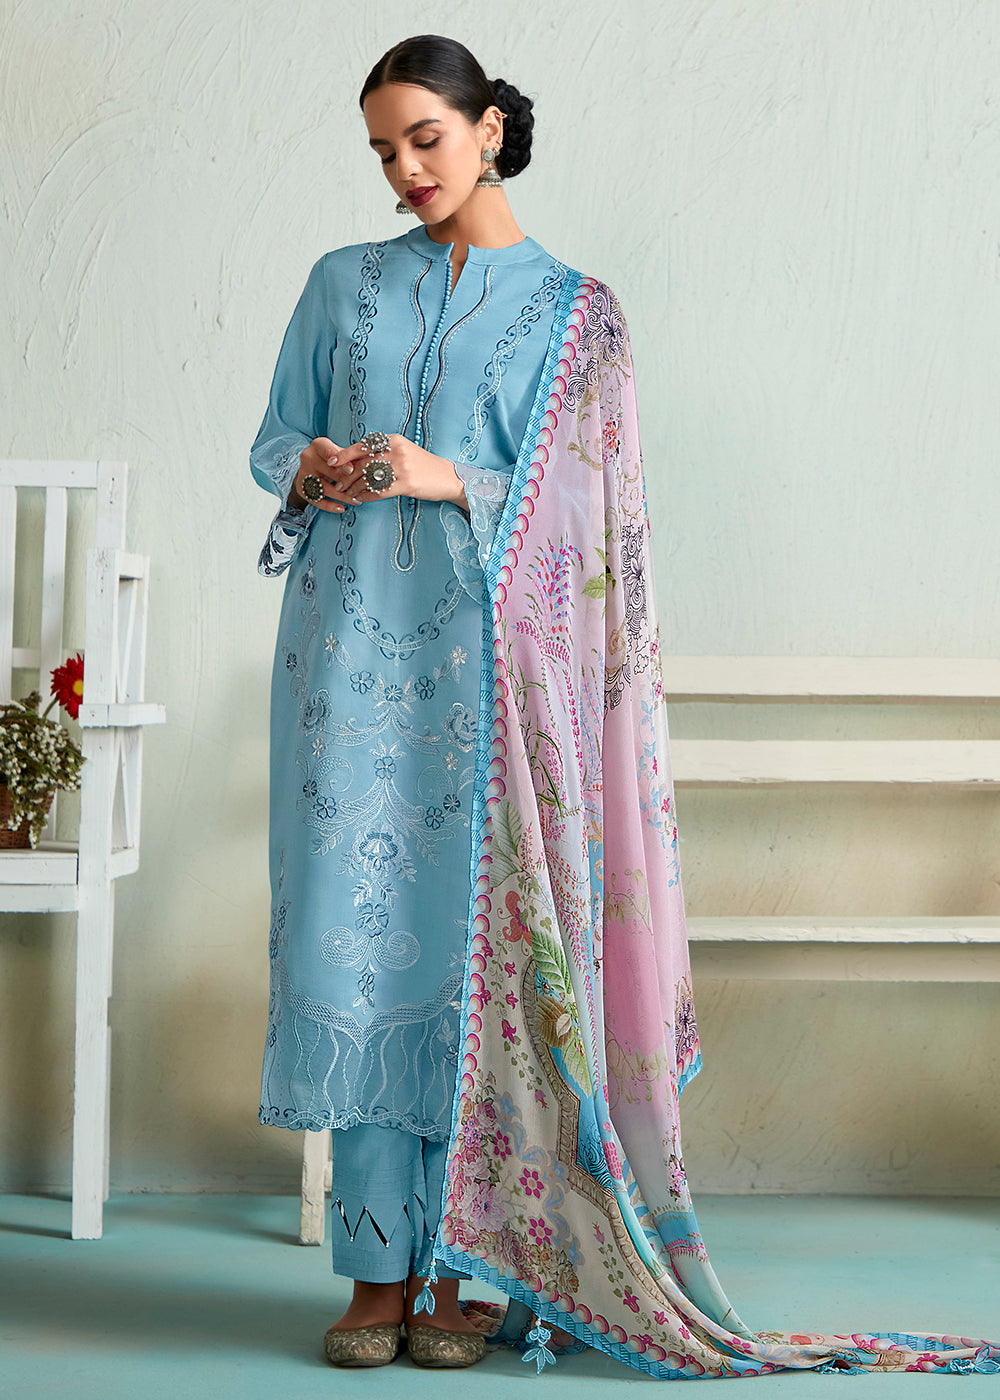 Buy Now Powder Blue Pure Muslin Resham Embroidered Salwar Suit Online in USA, UK, Canada, Germany, Australia & Worldwide at Empress Clothing.